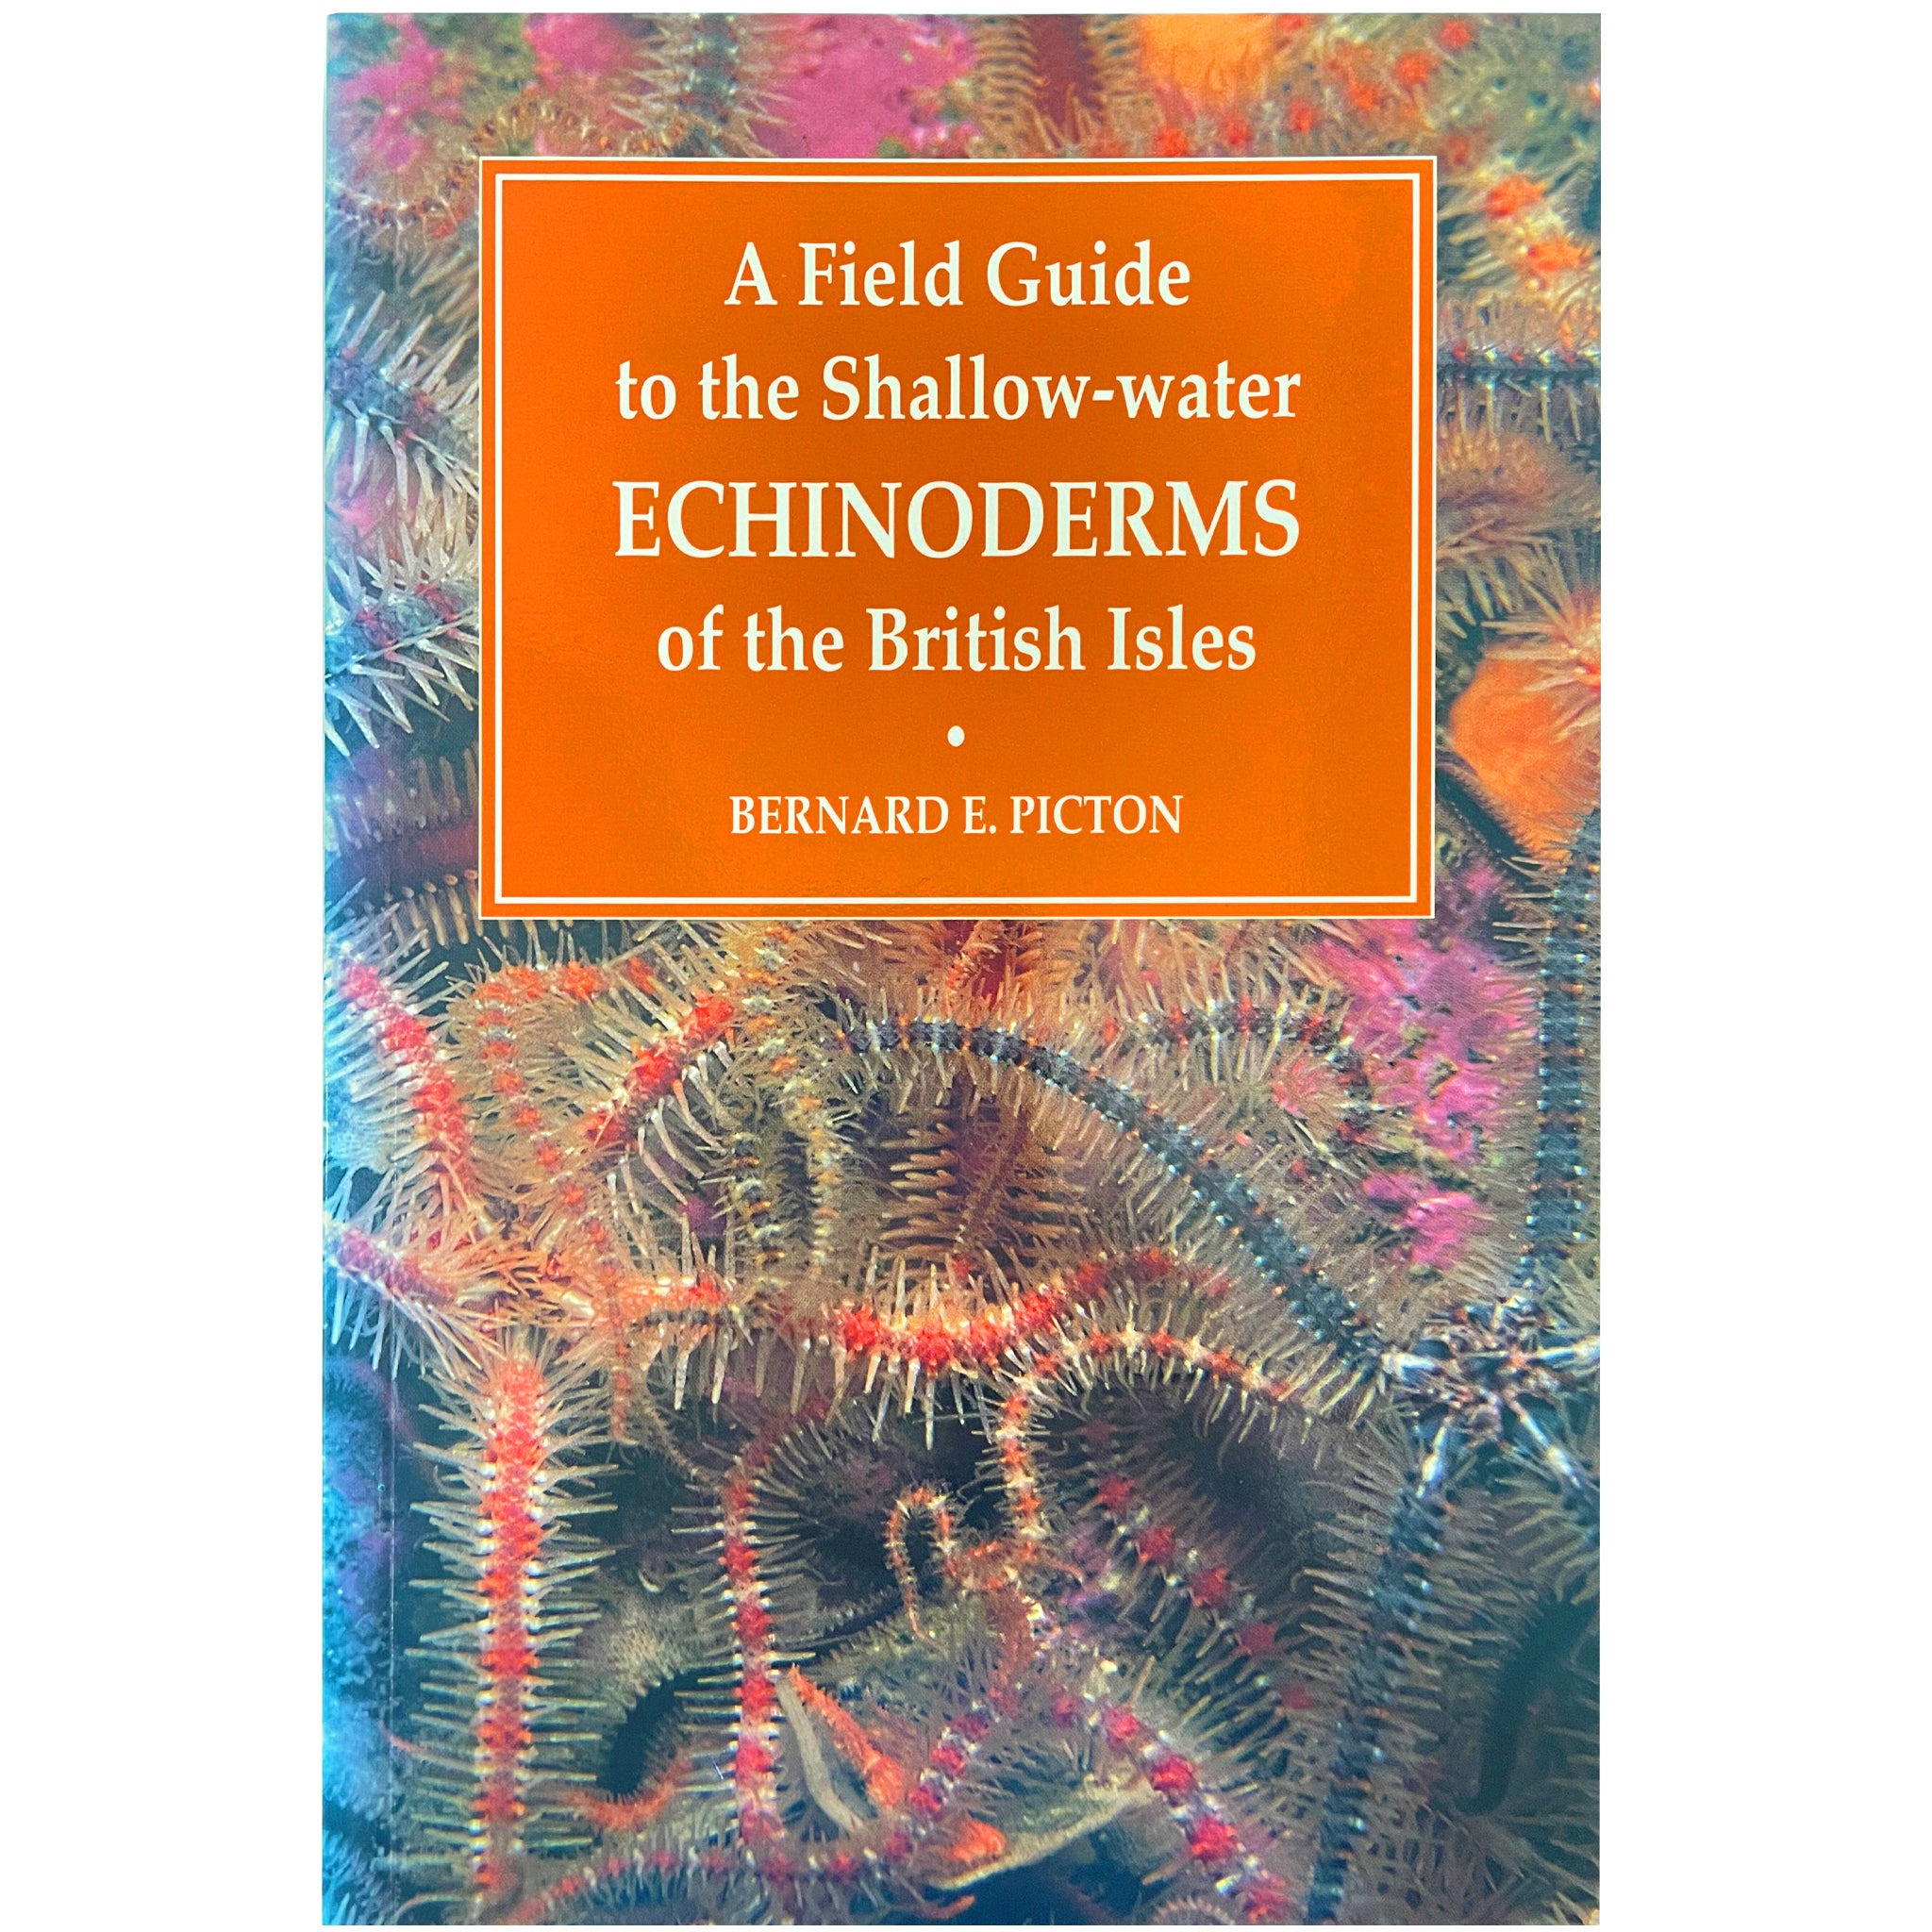 A Field Guide to the Shallow-water Echinoderms of the British Isles